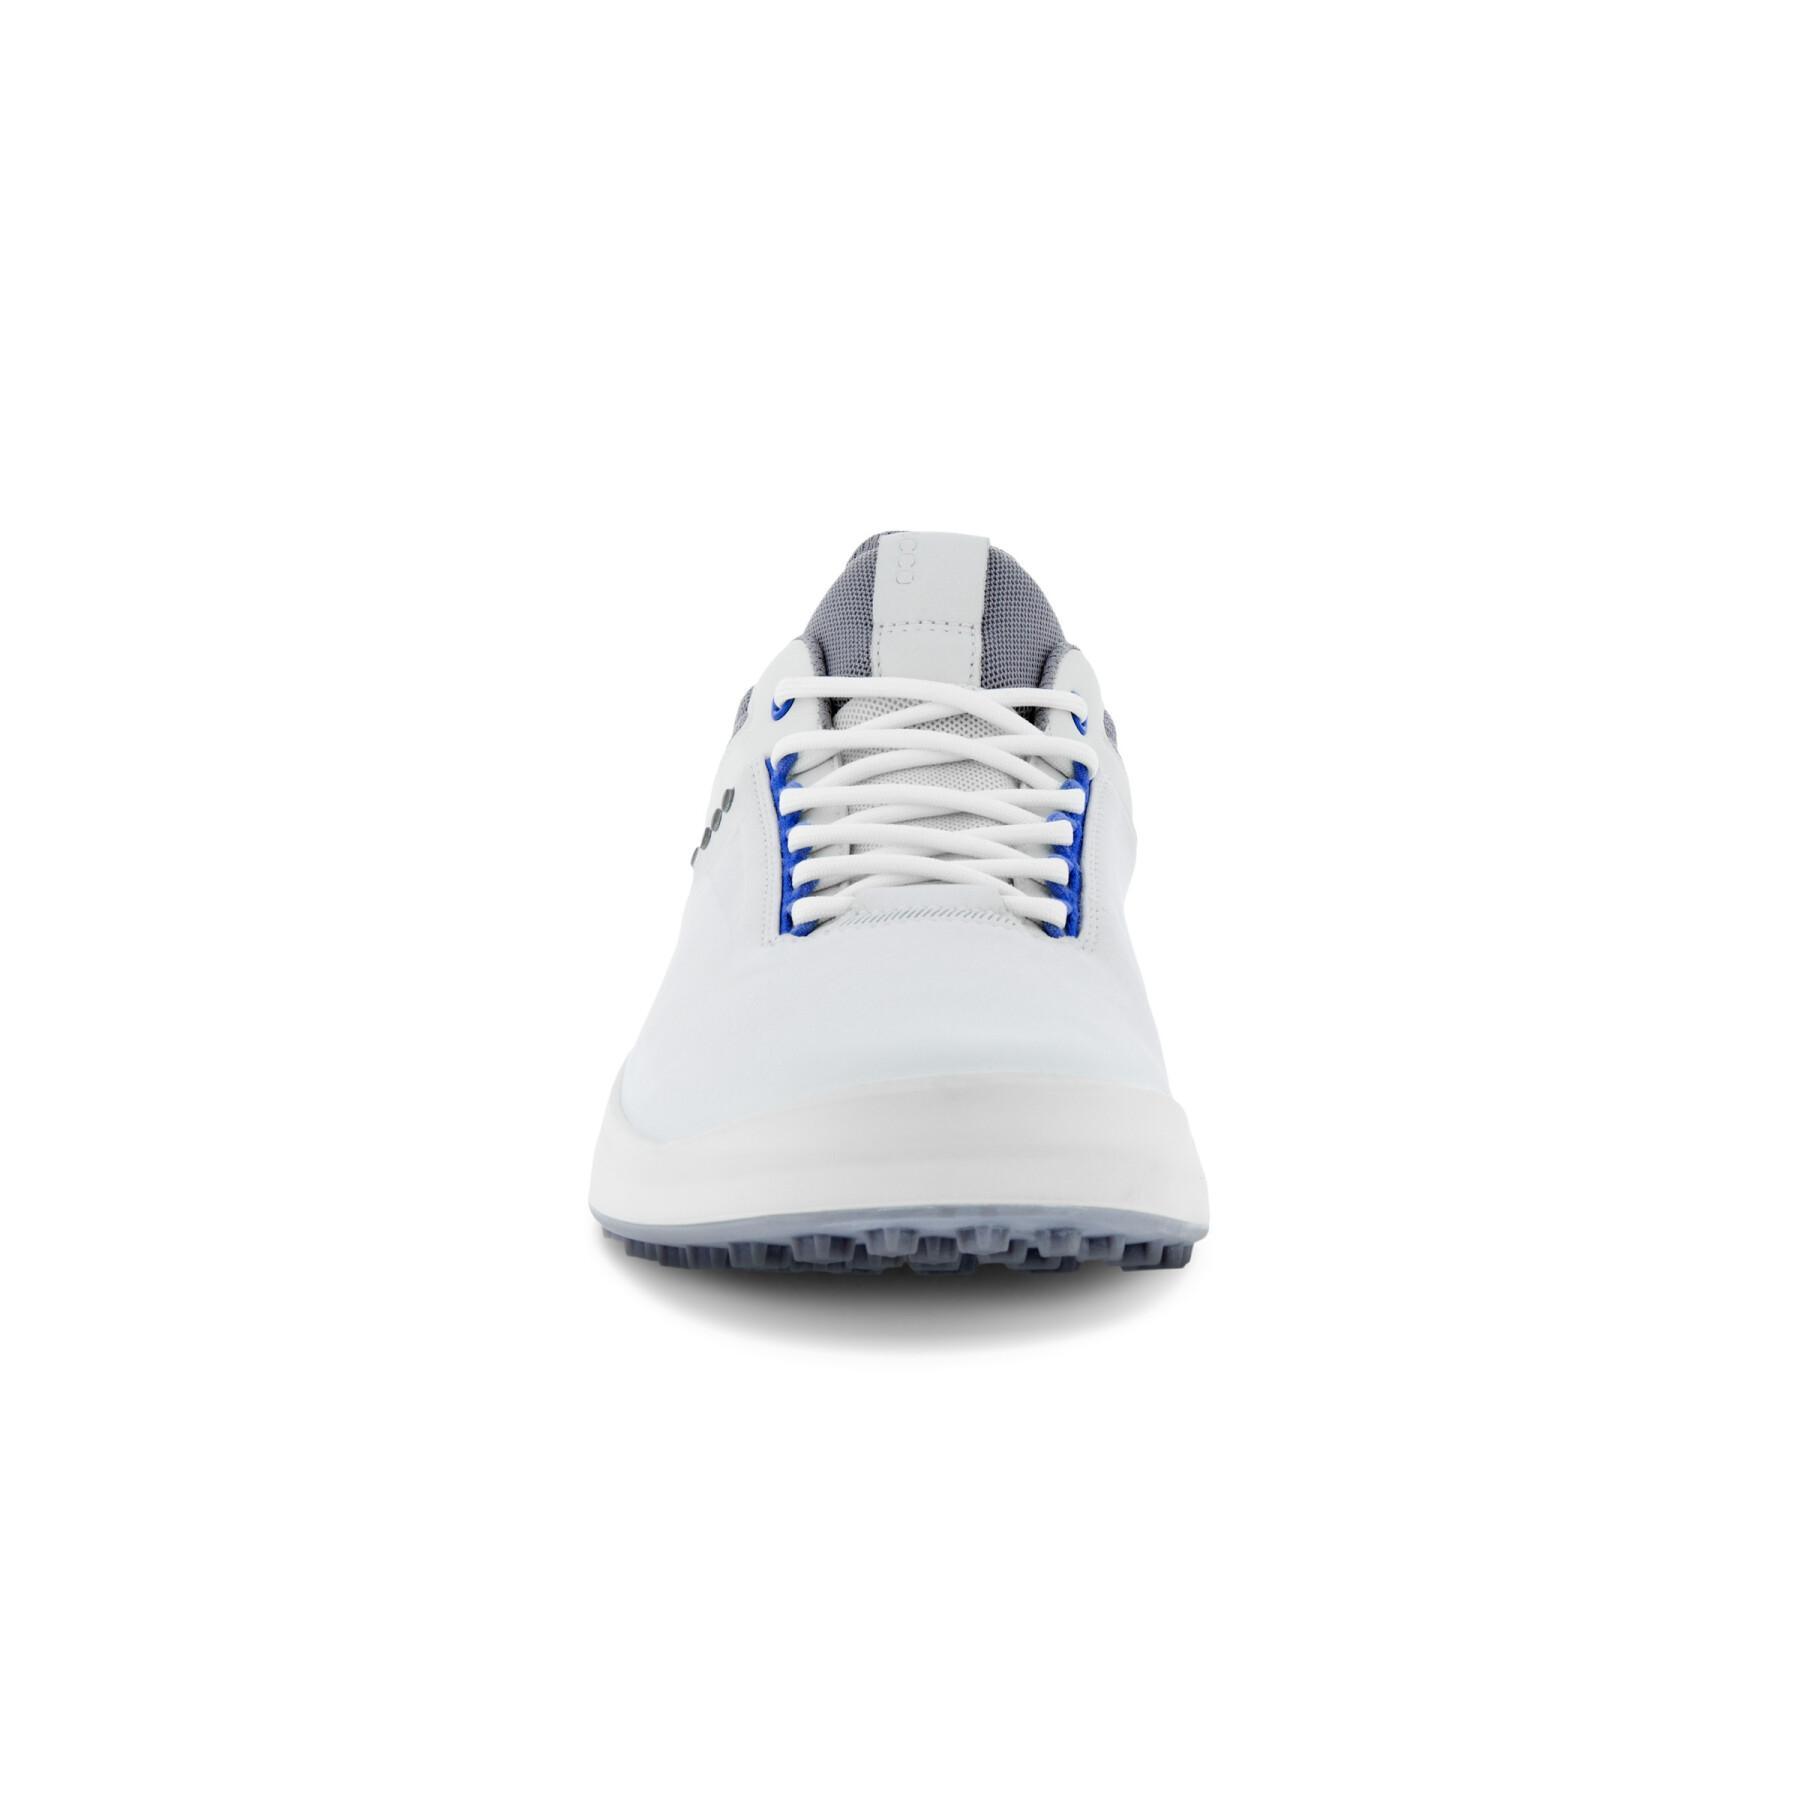 Spikeless golf shoes Ecco Core